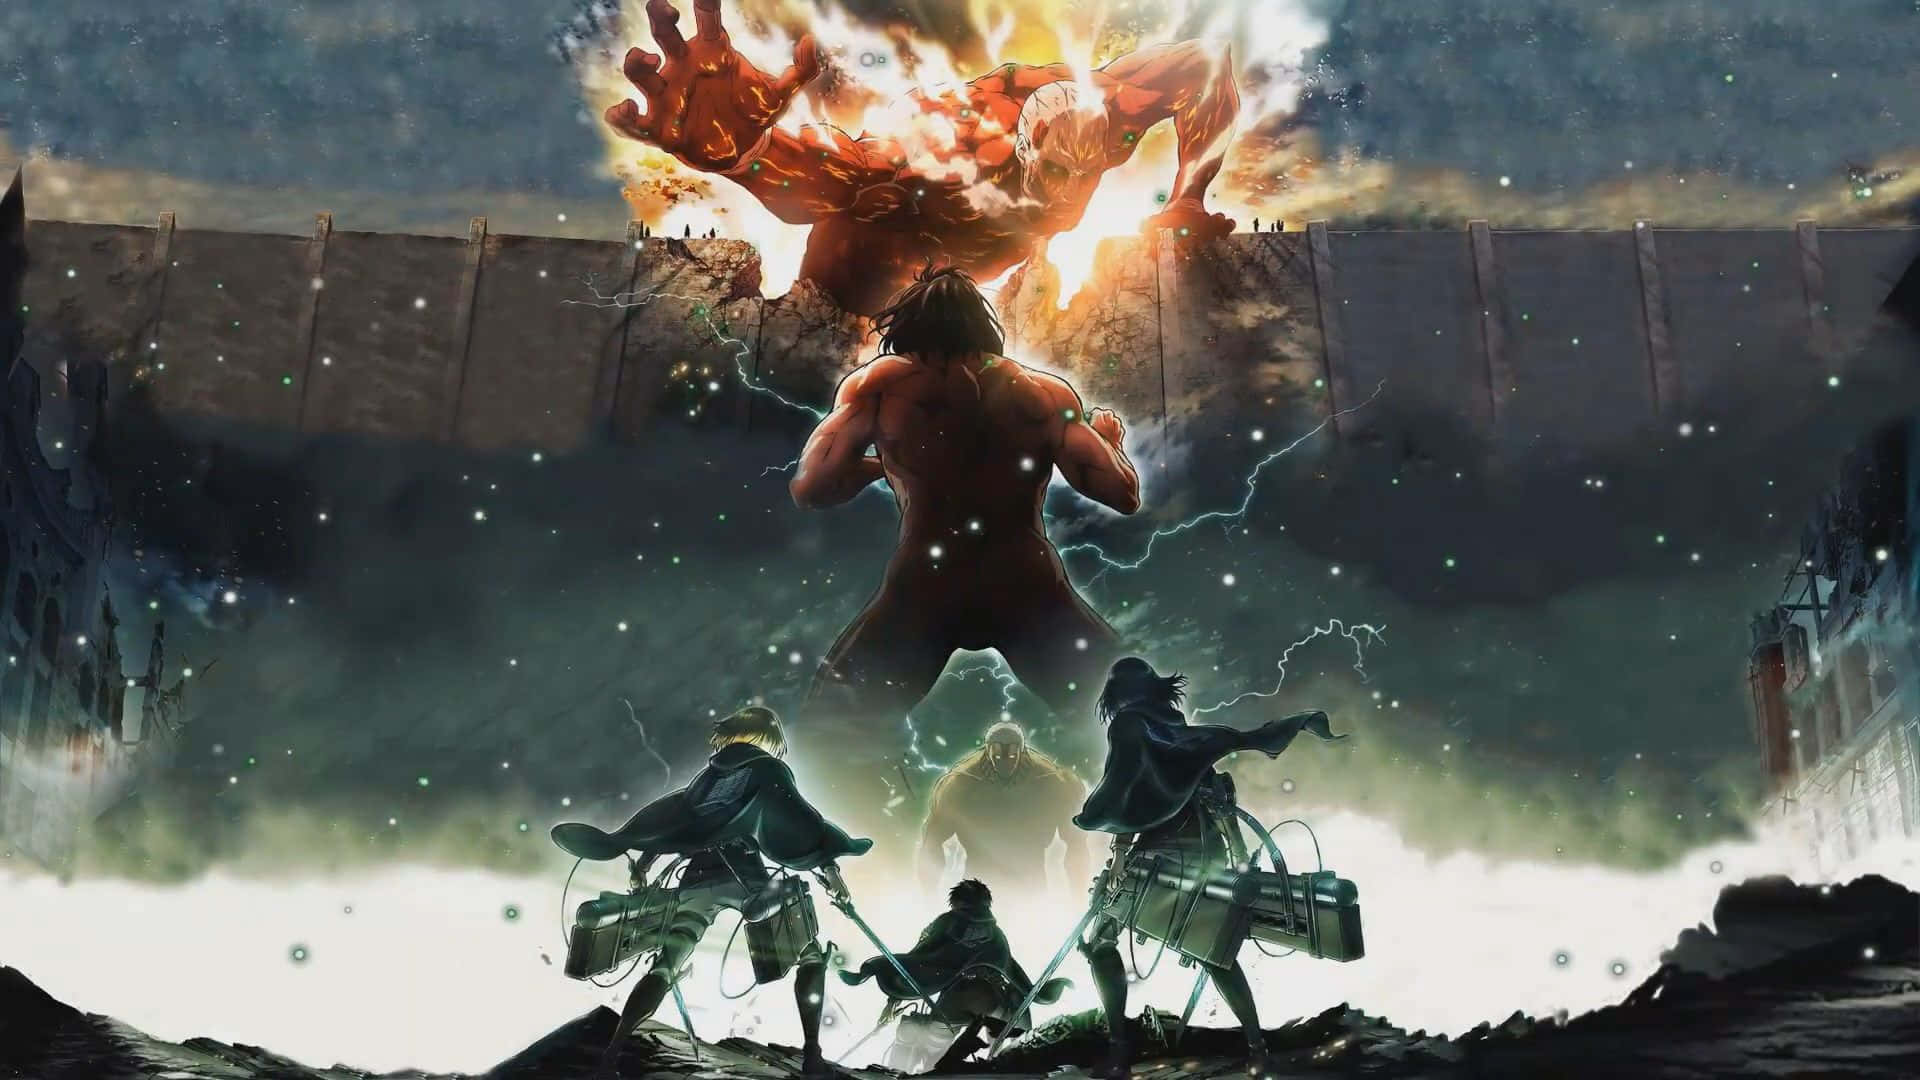 The world hangs in the balance as Attack on Titan Season 3 Comes to a Climax. Wallpaper